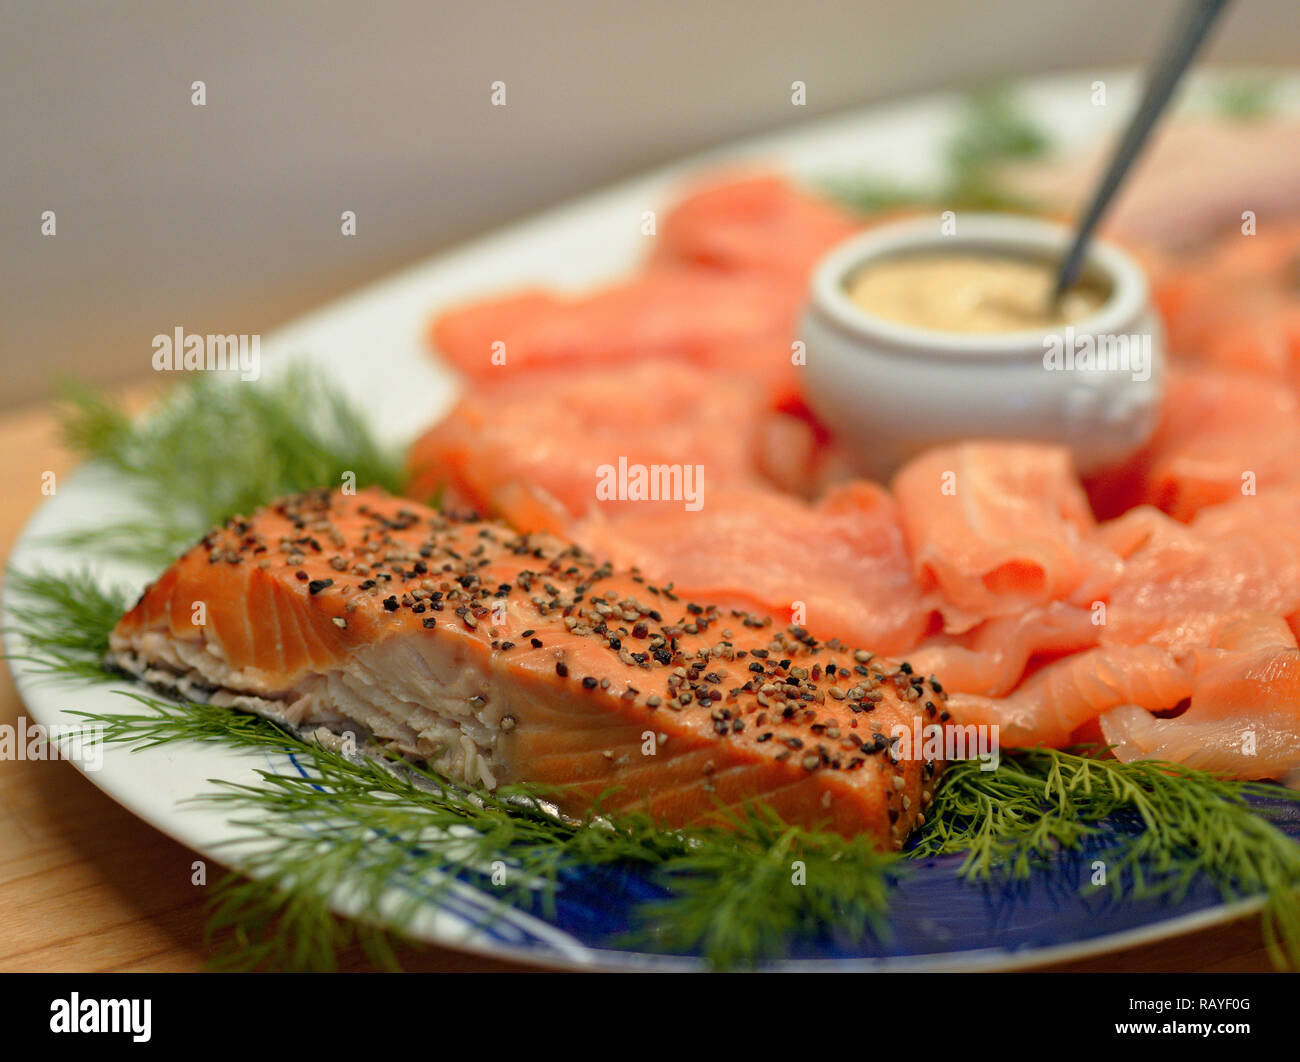 Fried salmon fillet arranged on a plate with dill, slices of smoked salmon, and a small china dish with mustard sauce Stock Photo